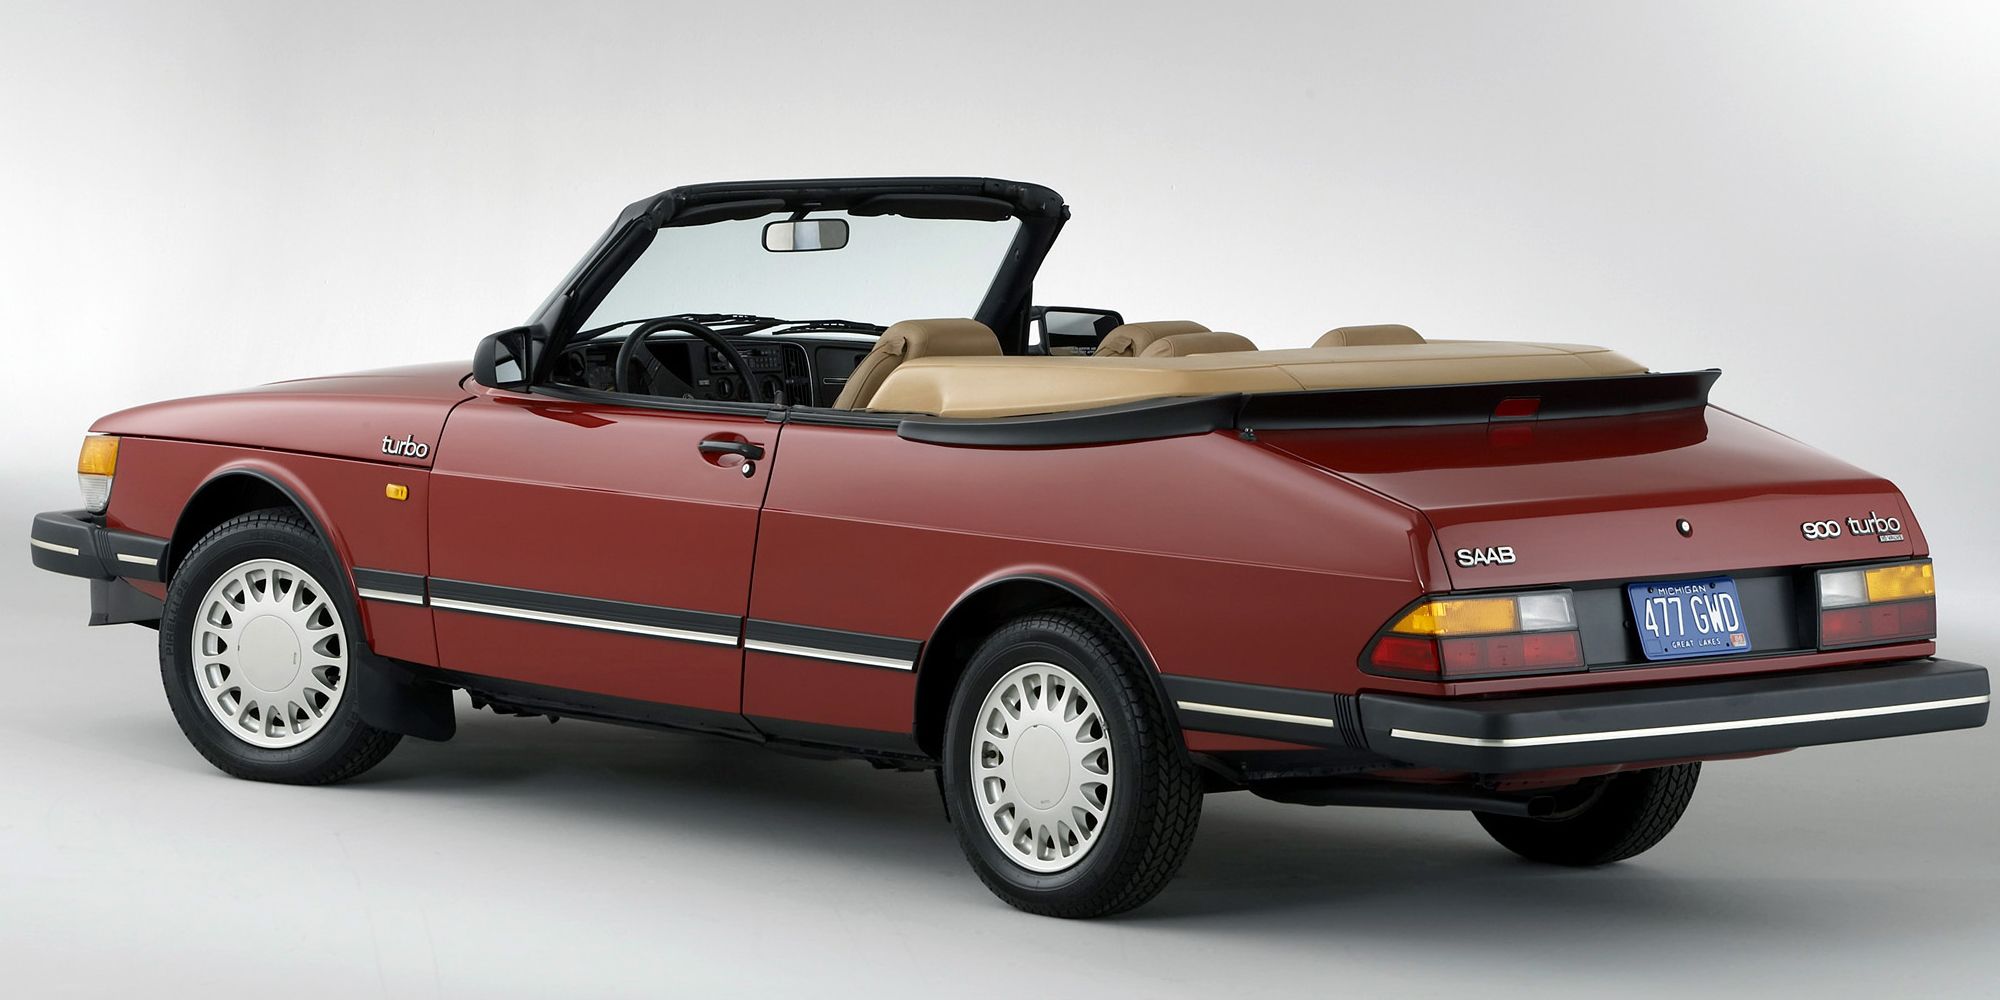 Rear 3/4 view of the 900 Turbo Convertible